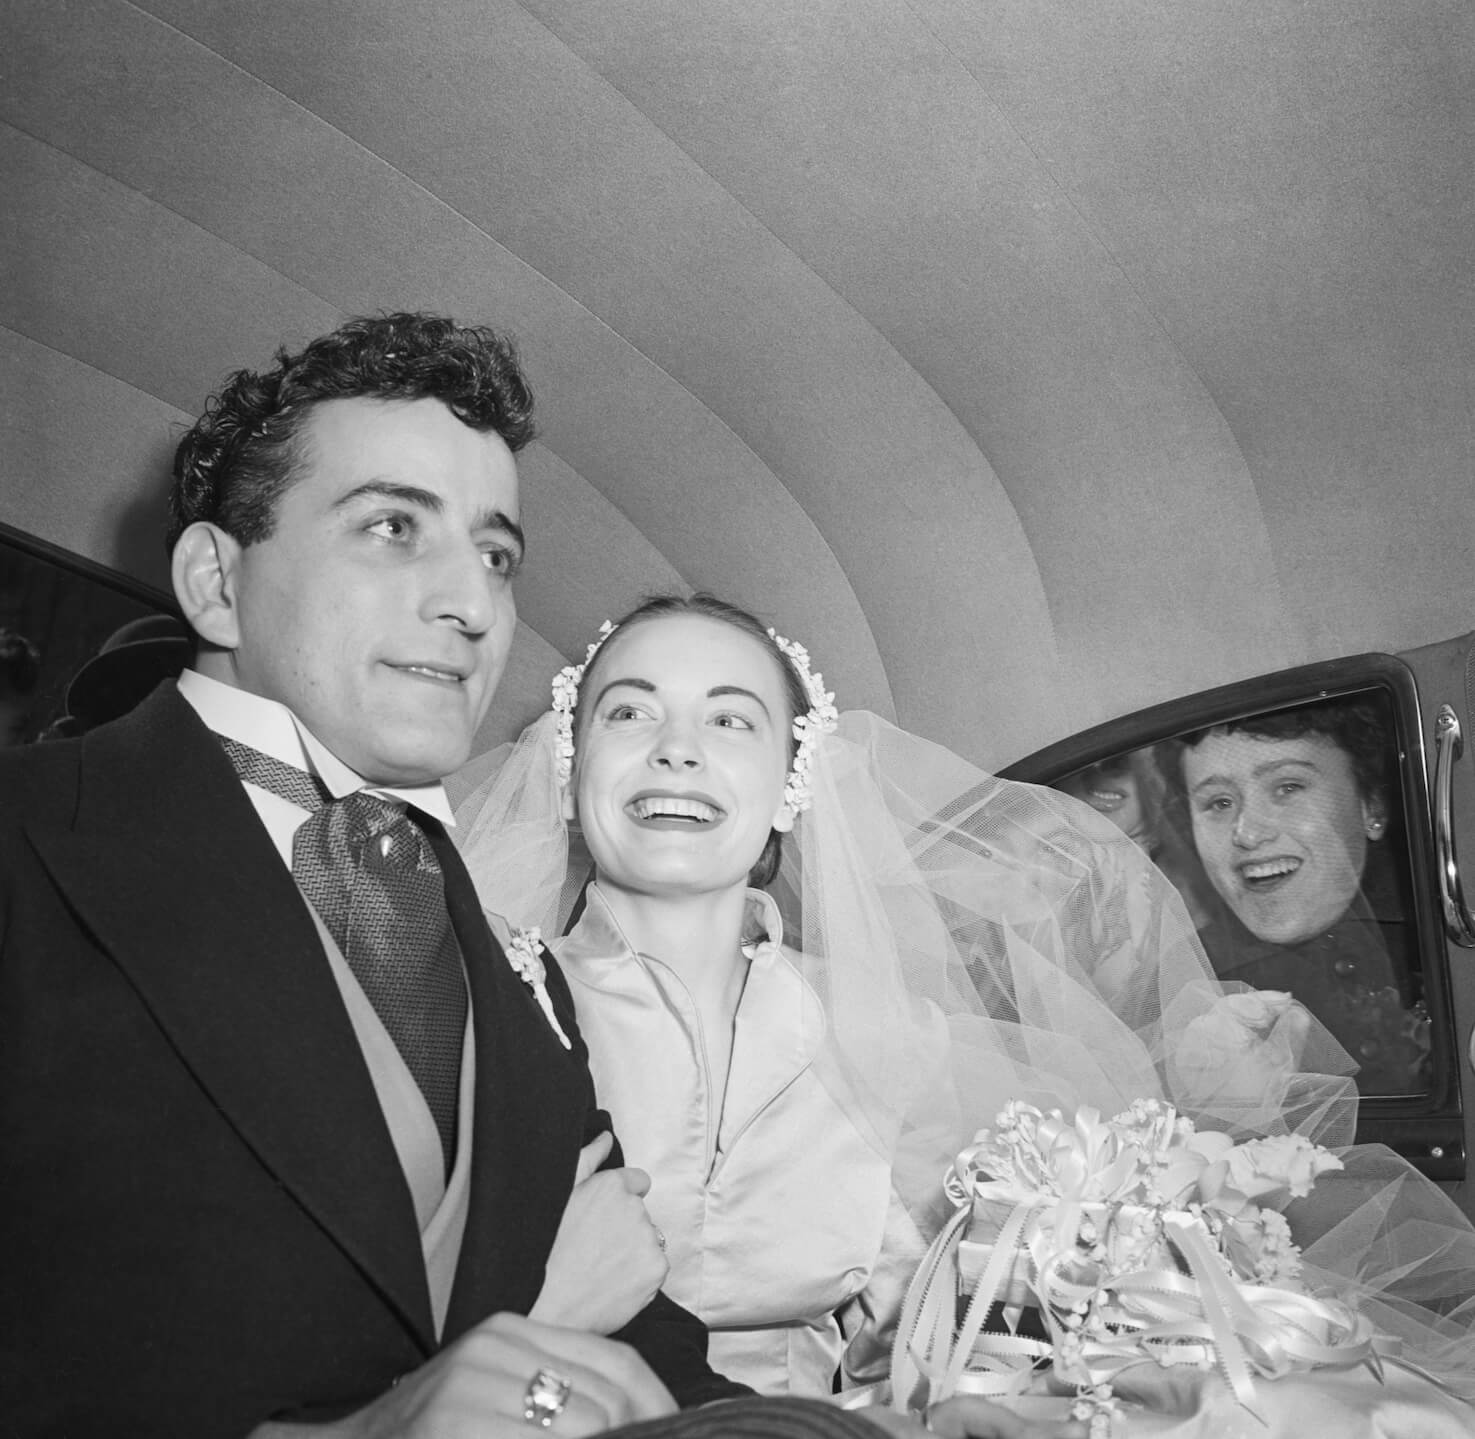 Tony Bennett and Patricia Beech smiling at each other in a car on their wedding day